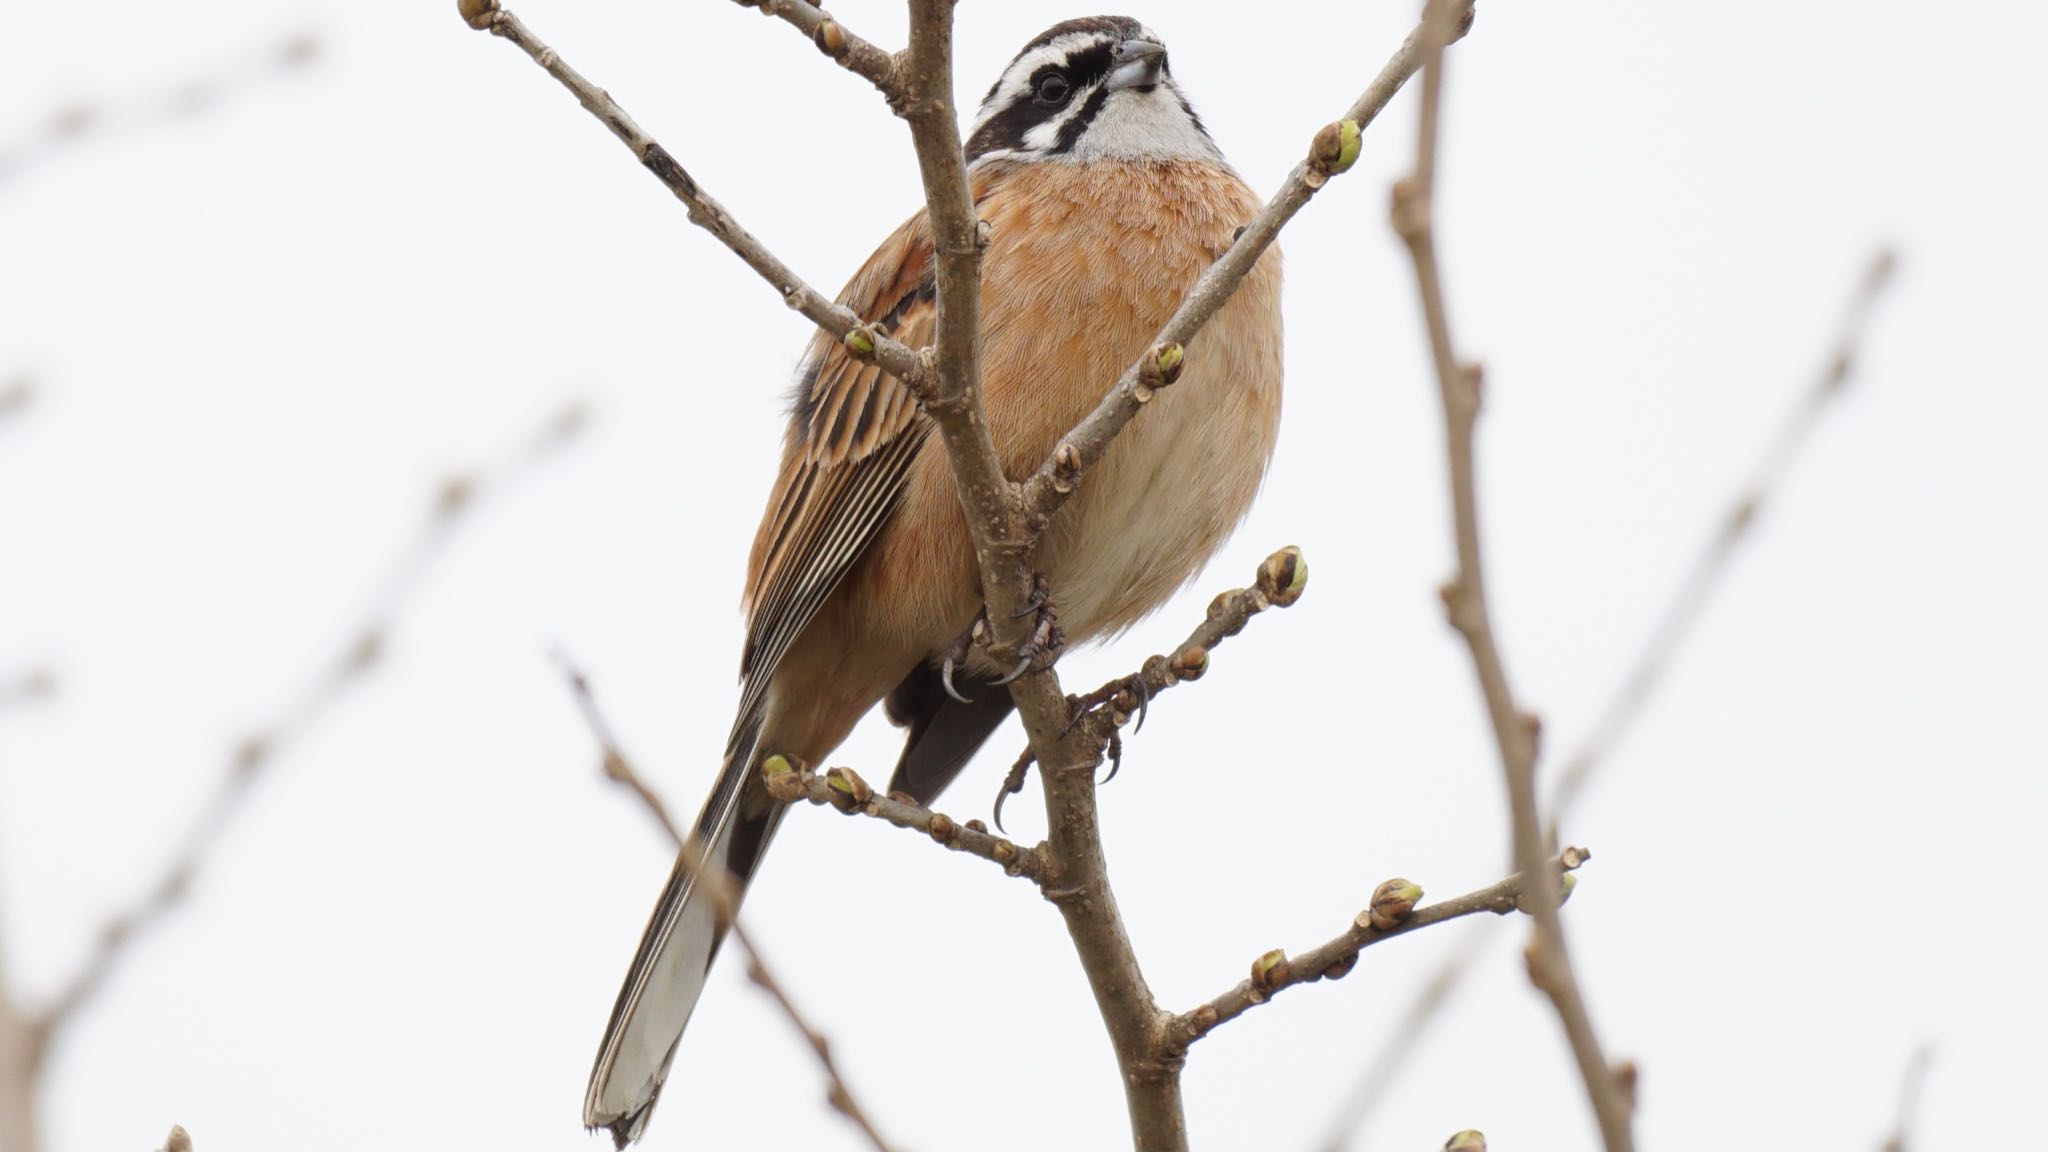 Photo of Meadow Bunting at 芝川第一調節池(芝川貯水池) by ツピ太郎